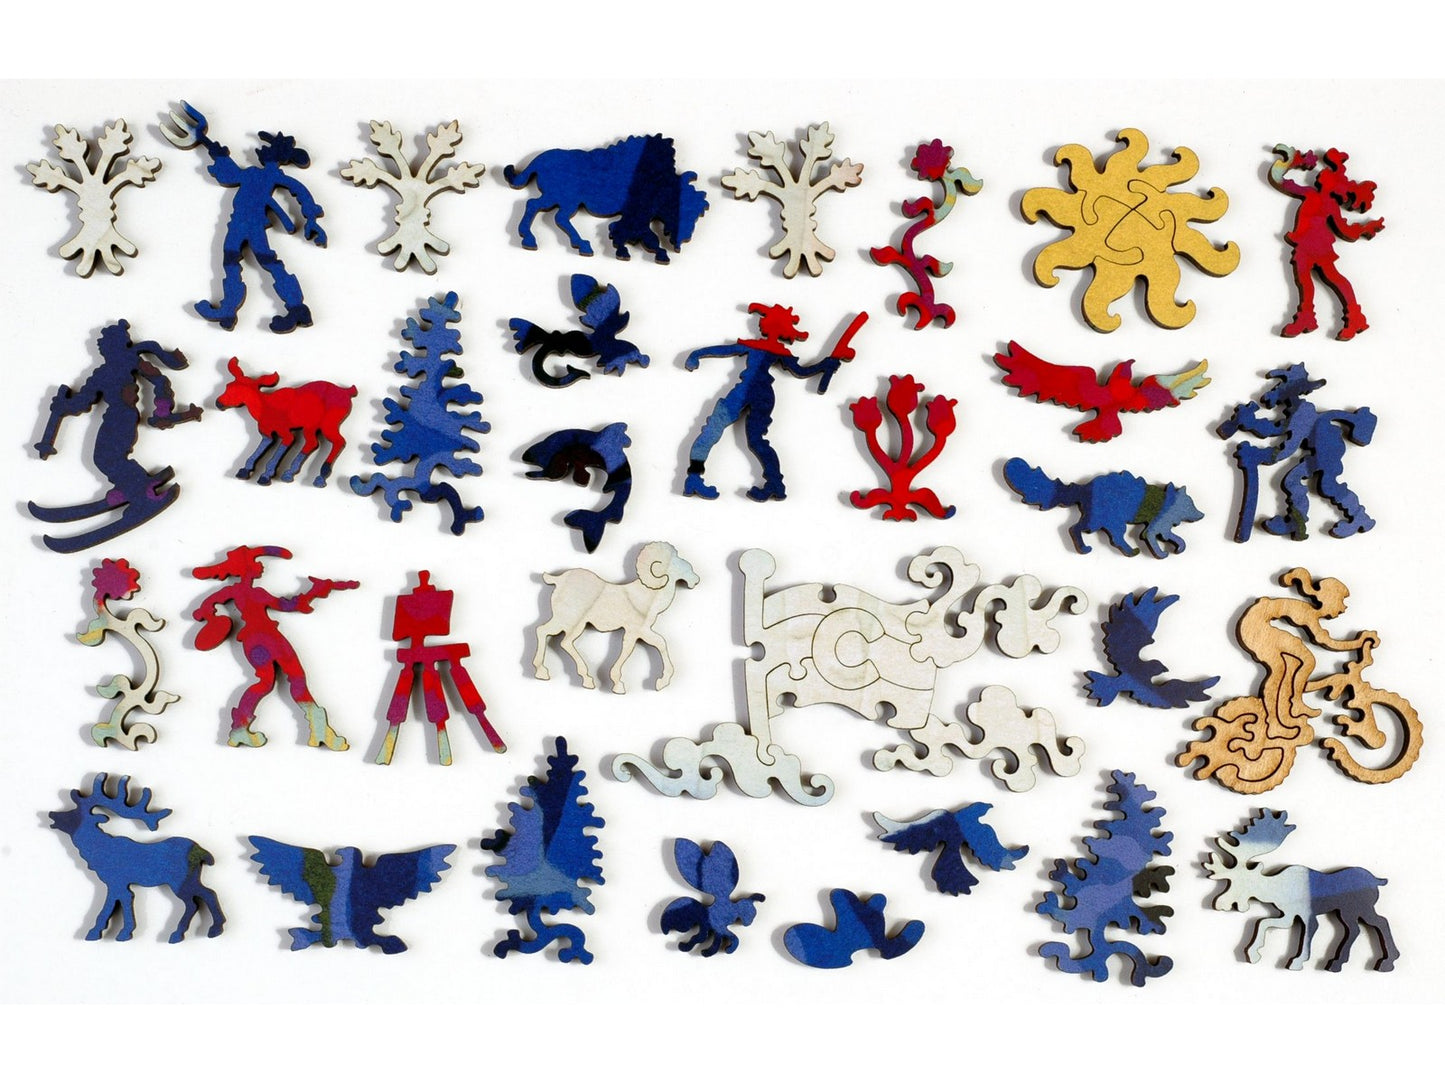 The whimsy pieces that can be found in the puzzle, Colorado Flag LG.